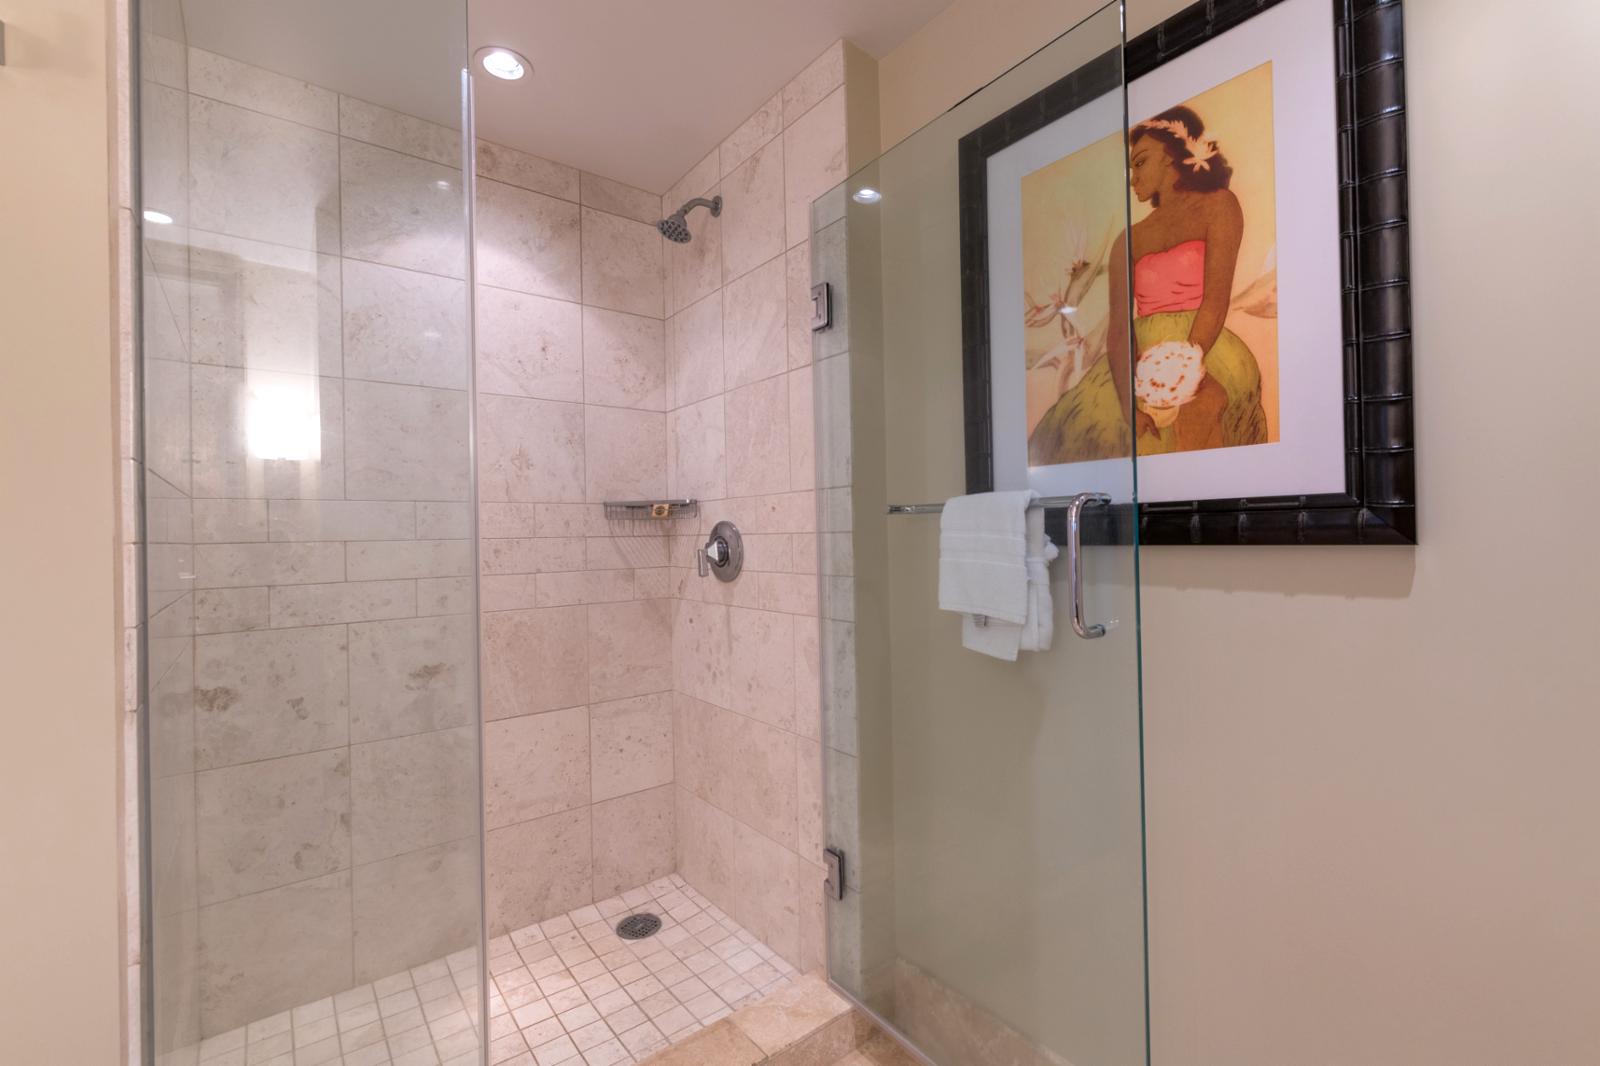 Floor to ceiling glass enclosed shower